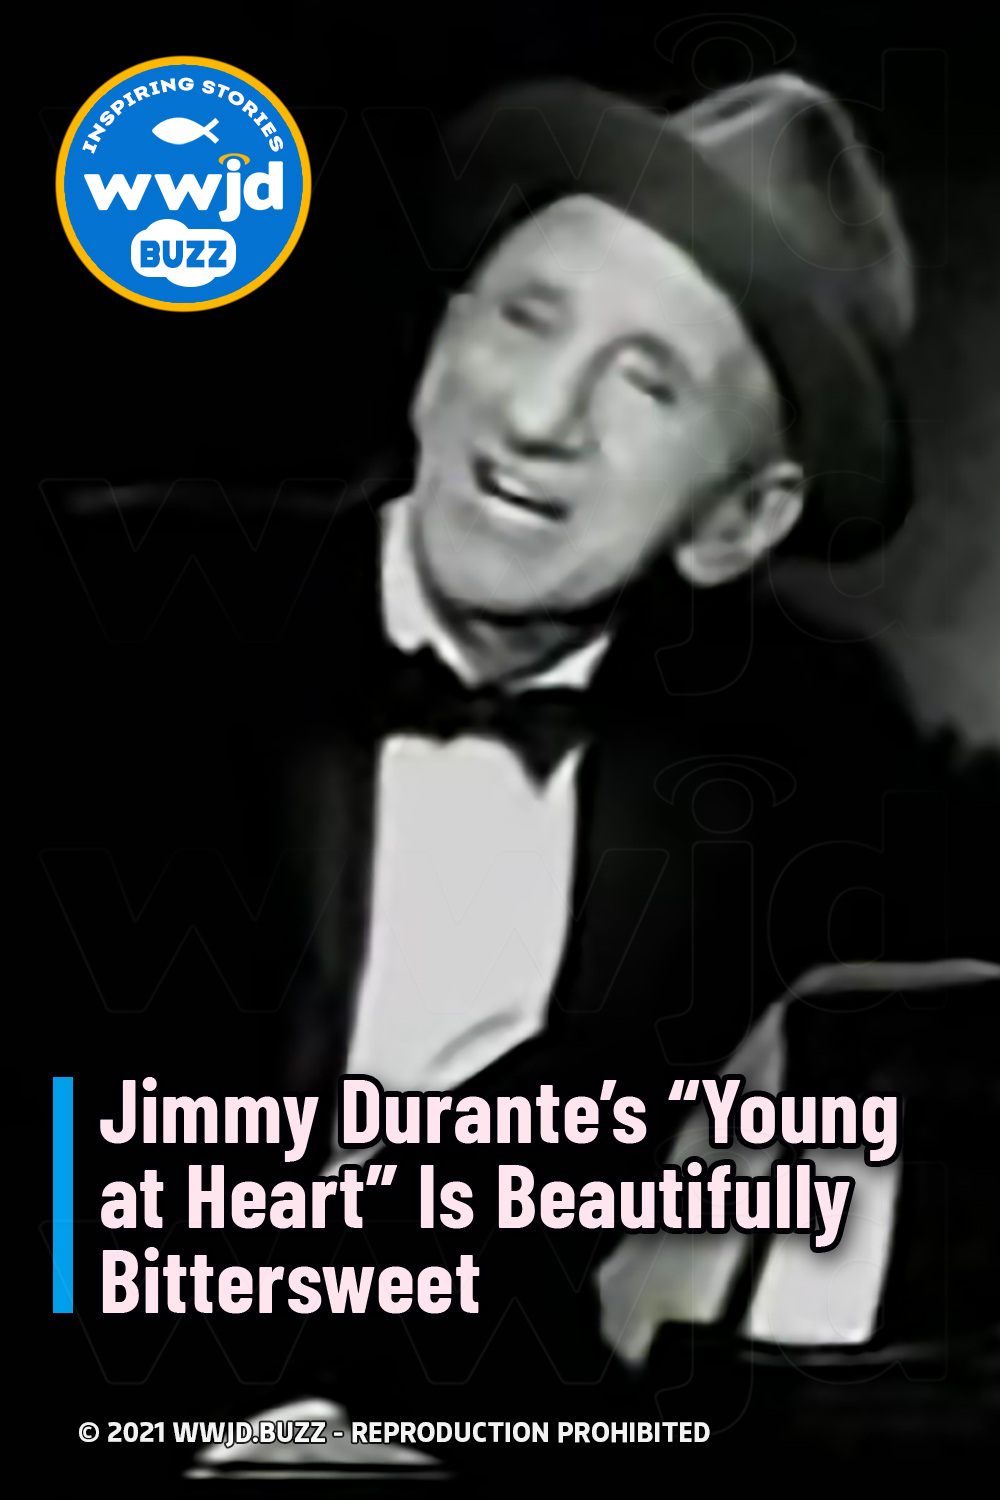 Jimmy Durante’s “Young at Heart” Is Beautifully Bittersweet